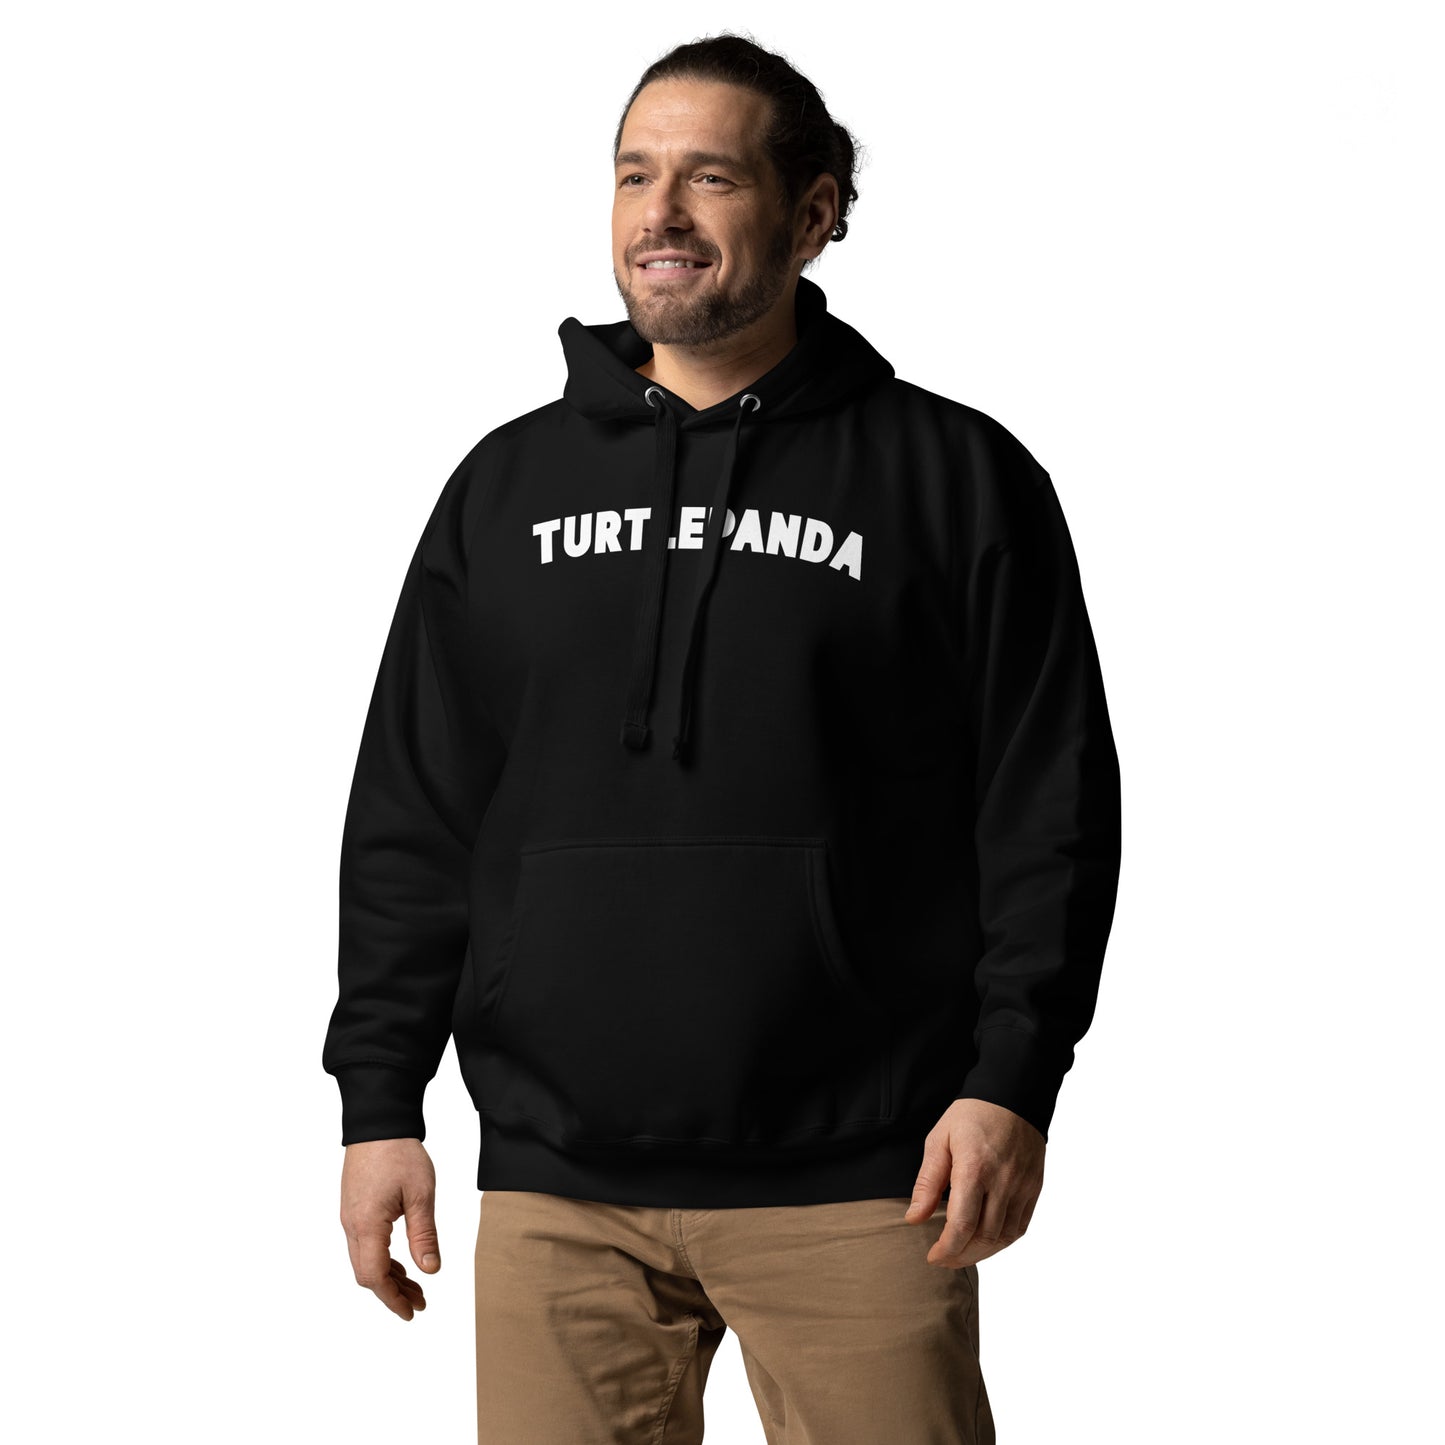 hoodies for men - tshirt - shirts - gym-workout - healthy